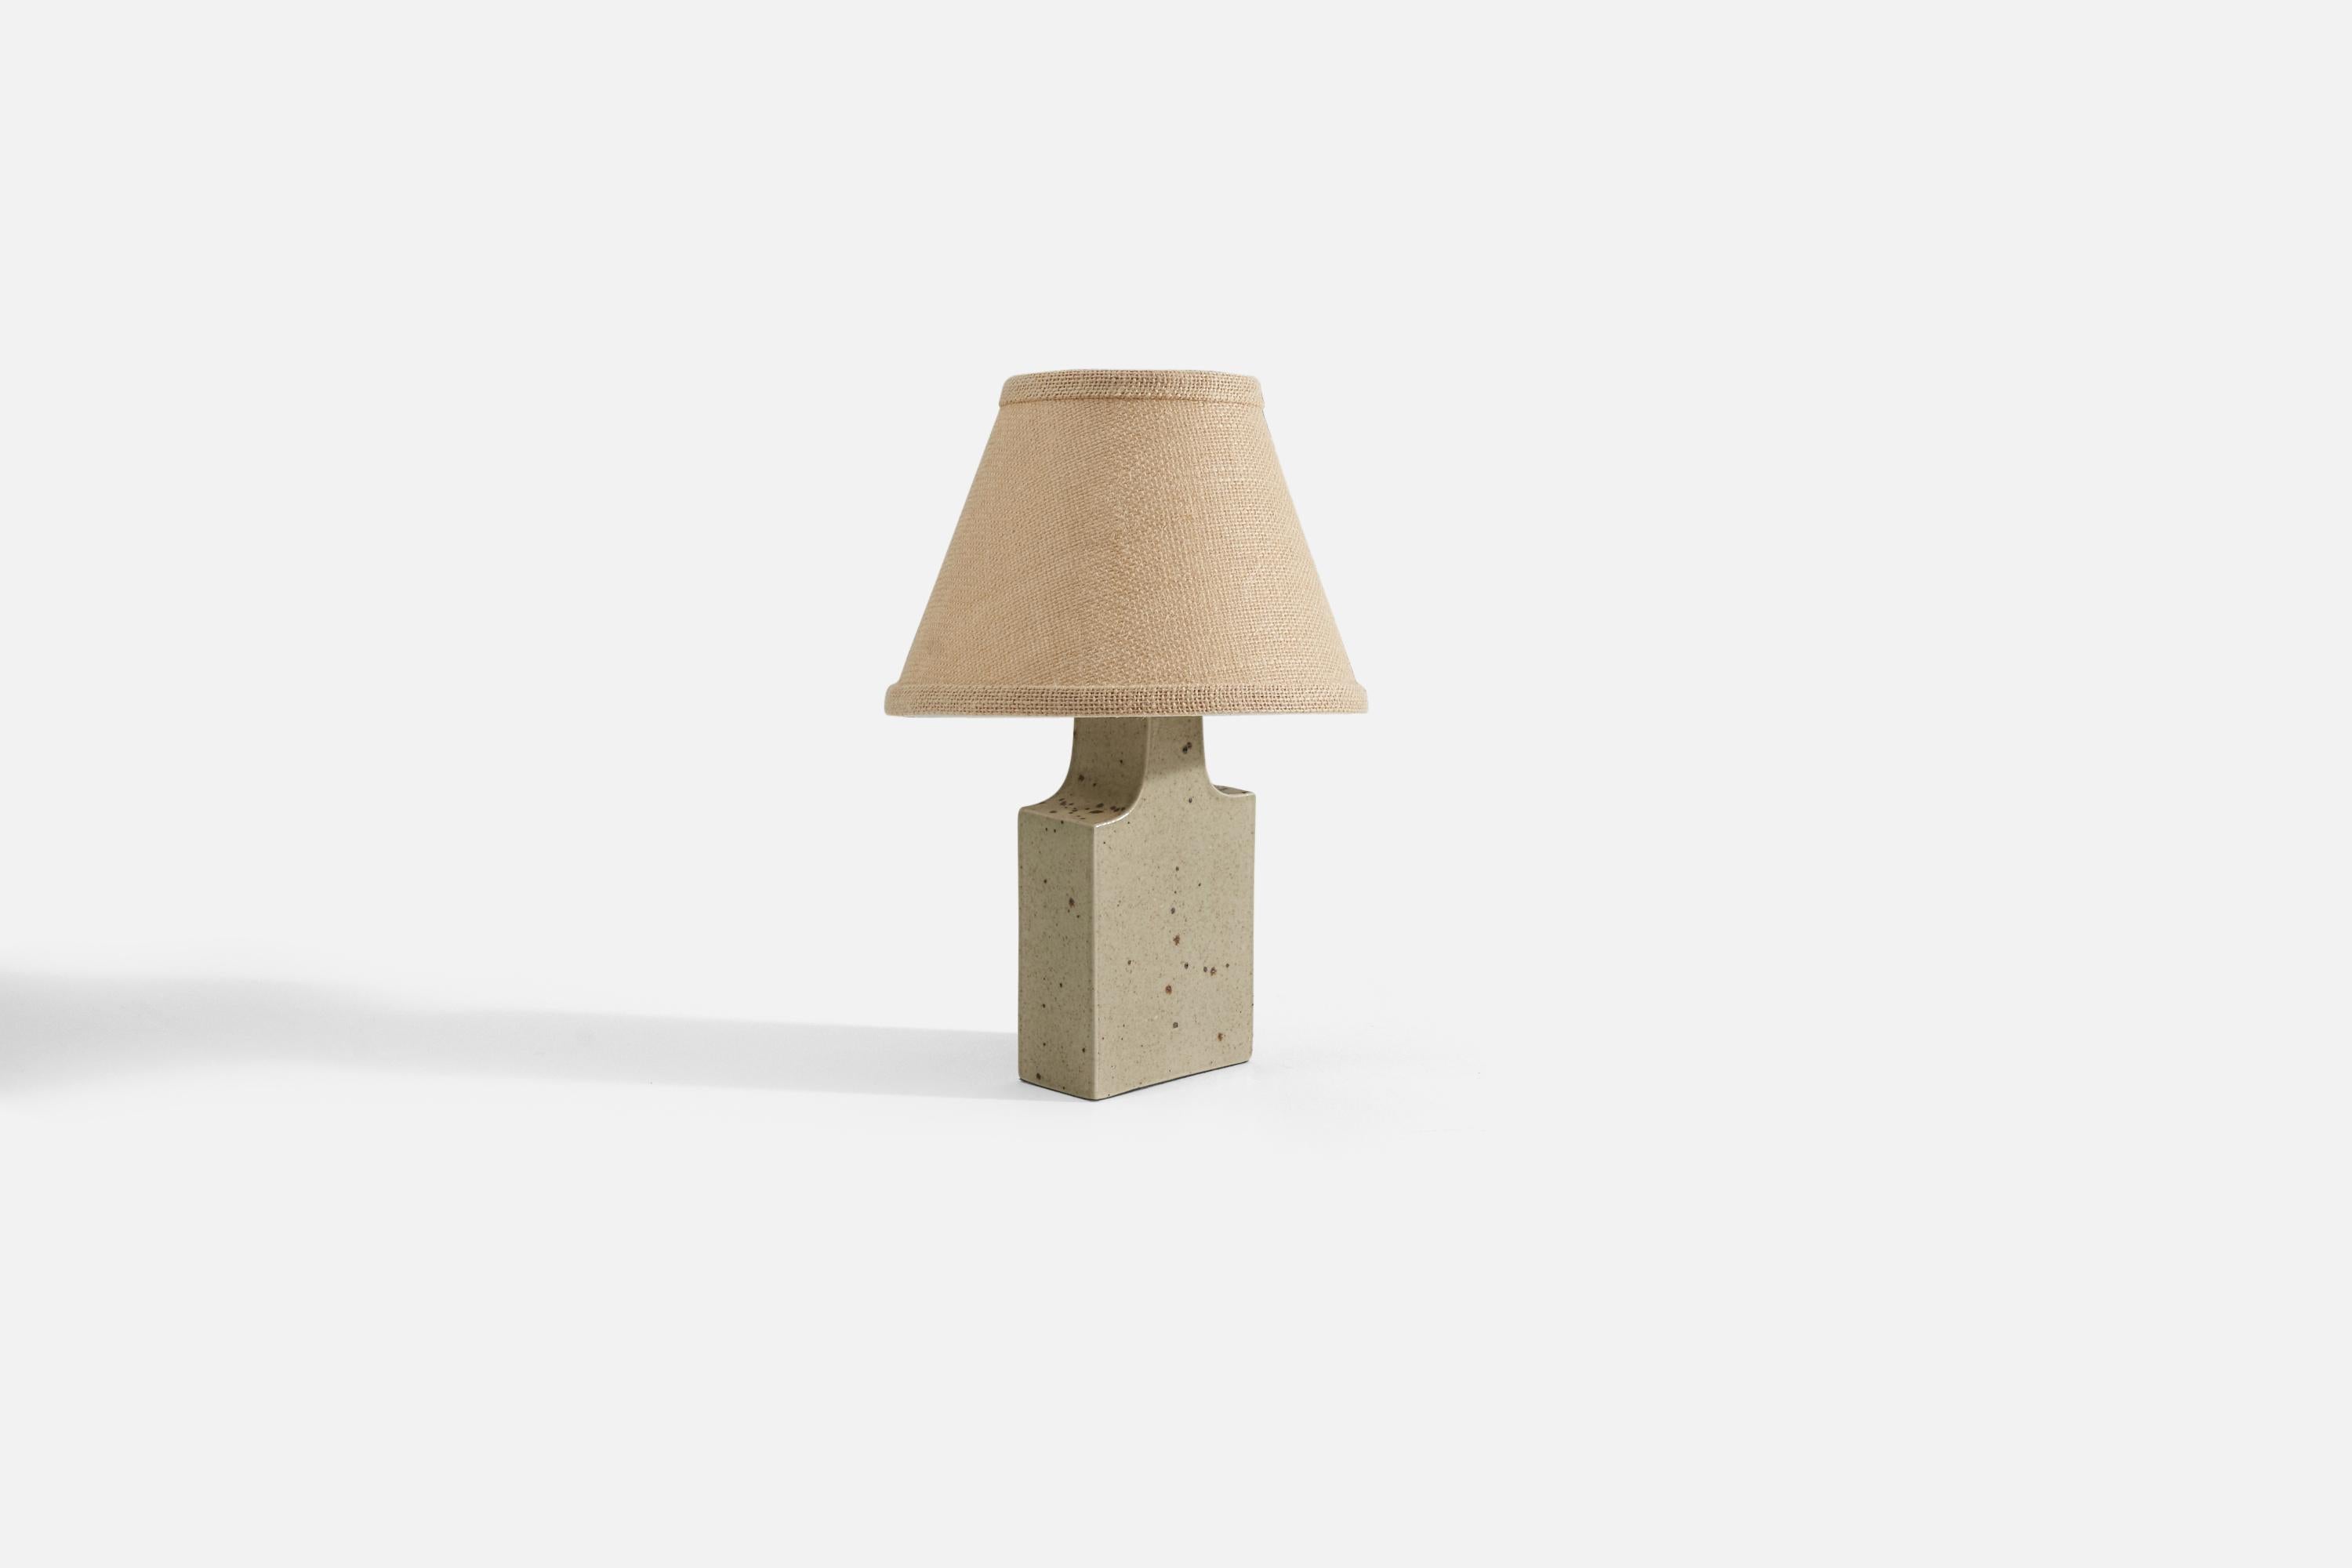 A grey-glazed, hand-cast stoneware table lamp designed by husband and wife Per & Annelise Linneman-Schmidt, and produced in their own Studio, named Palshus, in Sengeløse, Denmark. Signed.

Sold without lampshade. Stated dimensions exclude